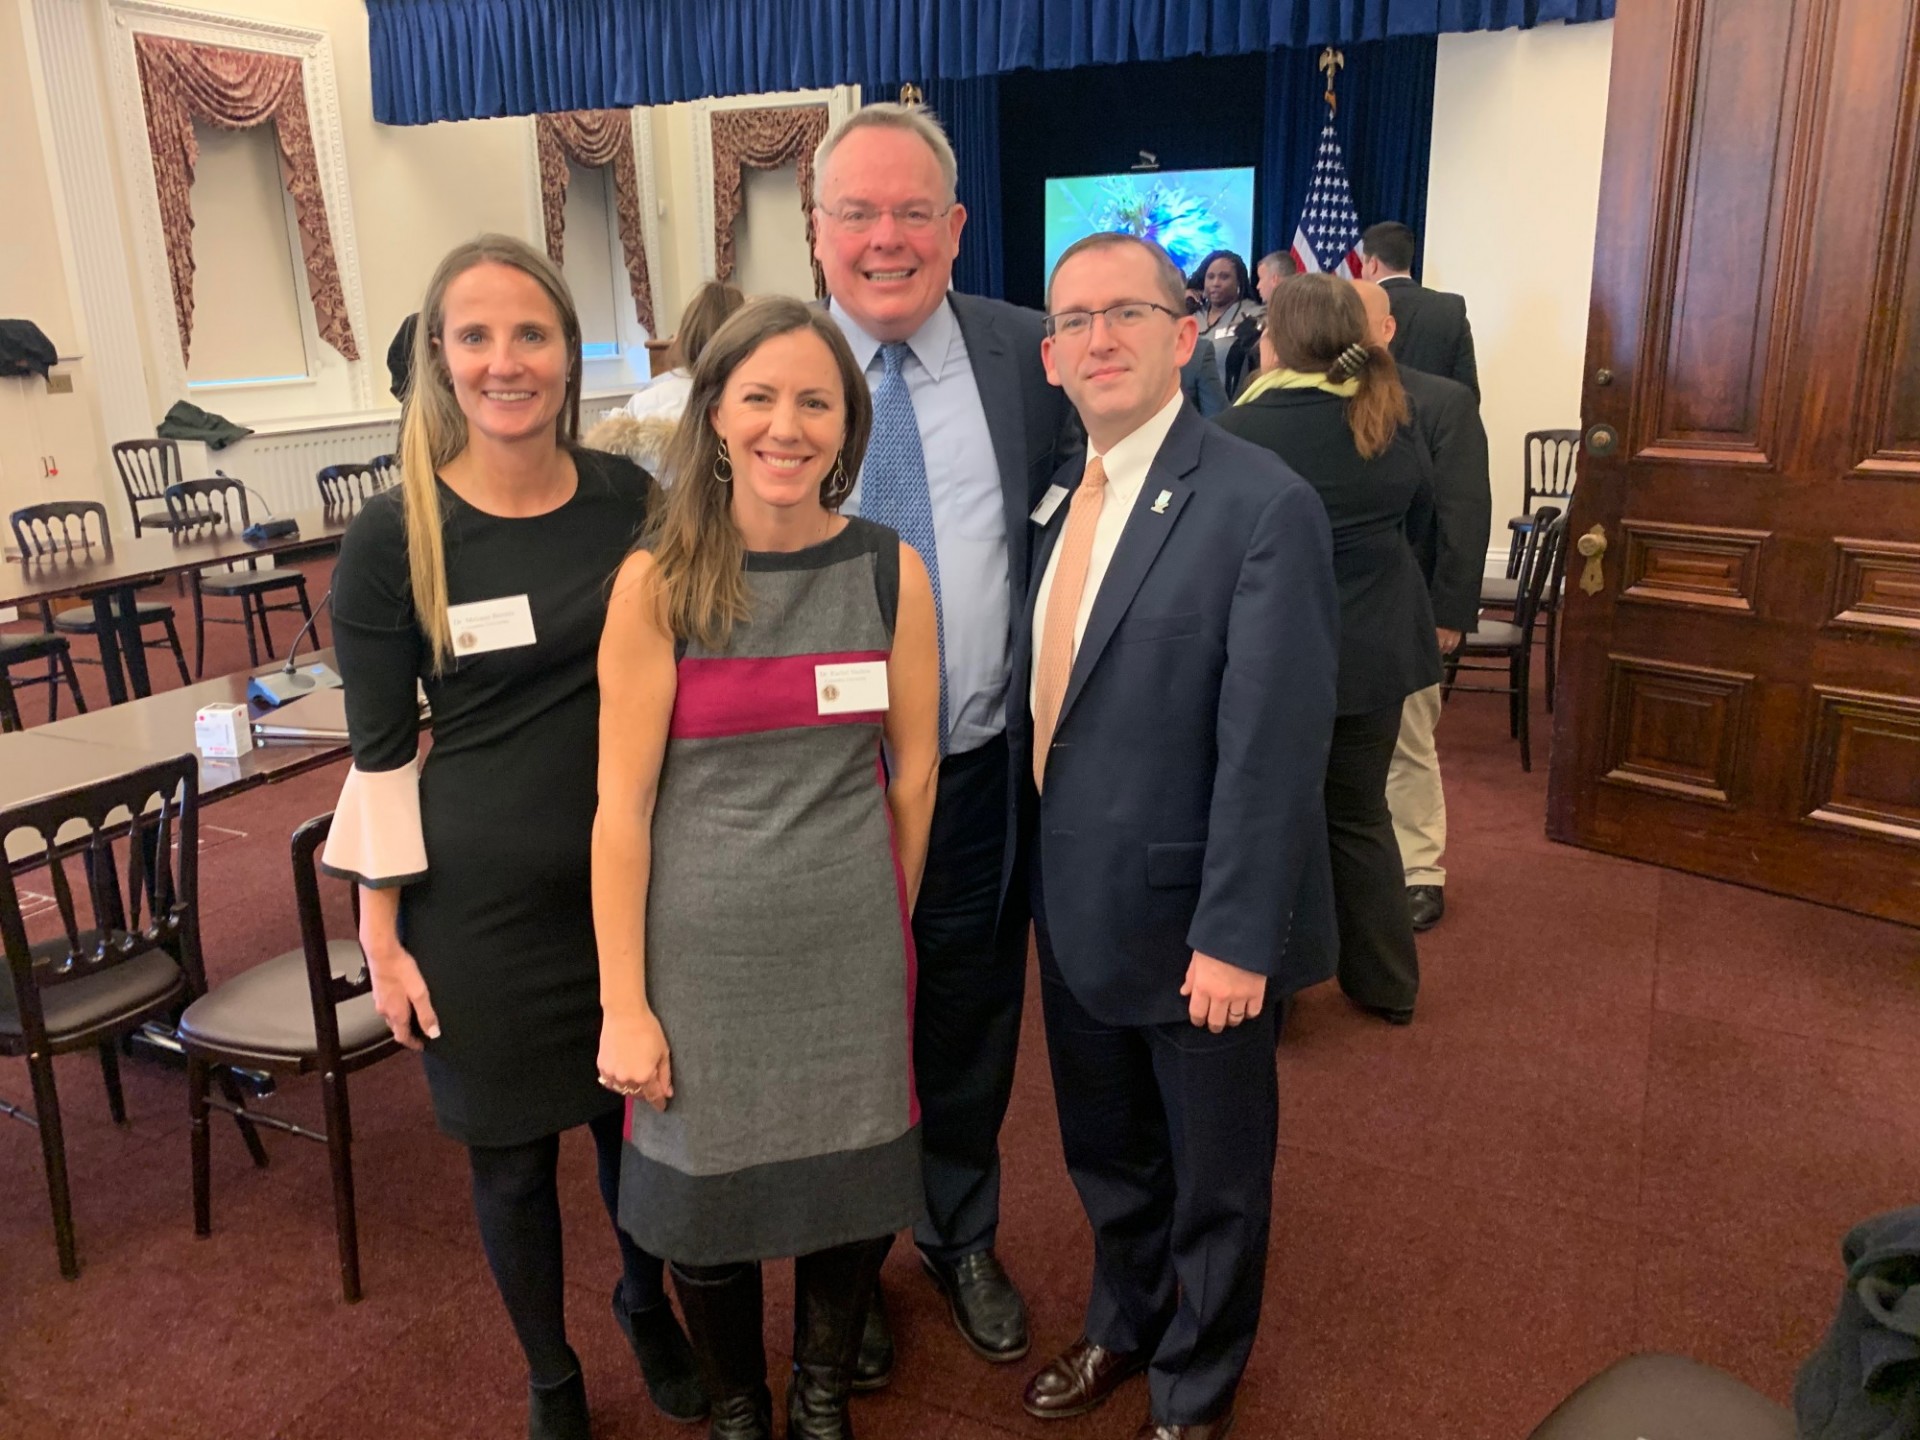 From left to right: Dr. Melanie Bernitz, Columbia Health, Dr. Rachel Shelton, Columbia School of Public Health, Director Jim Carroll, ONDCP, and Dr. Michael McNeil, Columbia Health